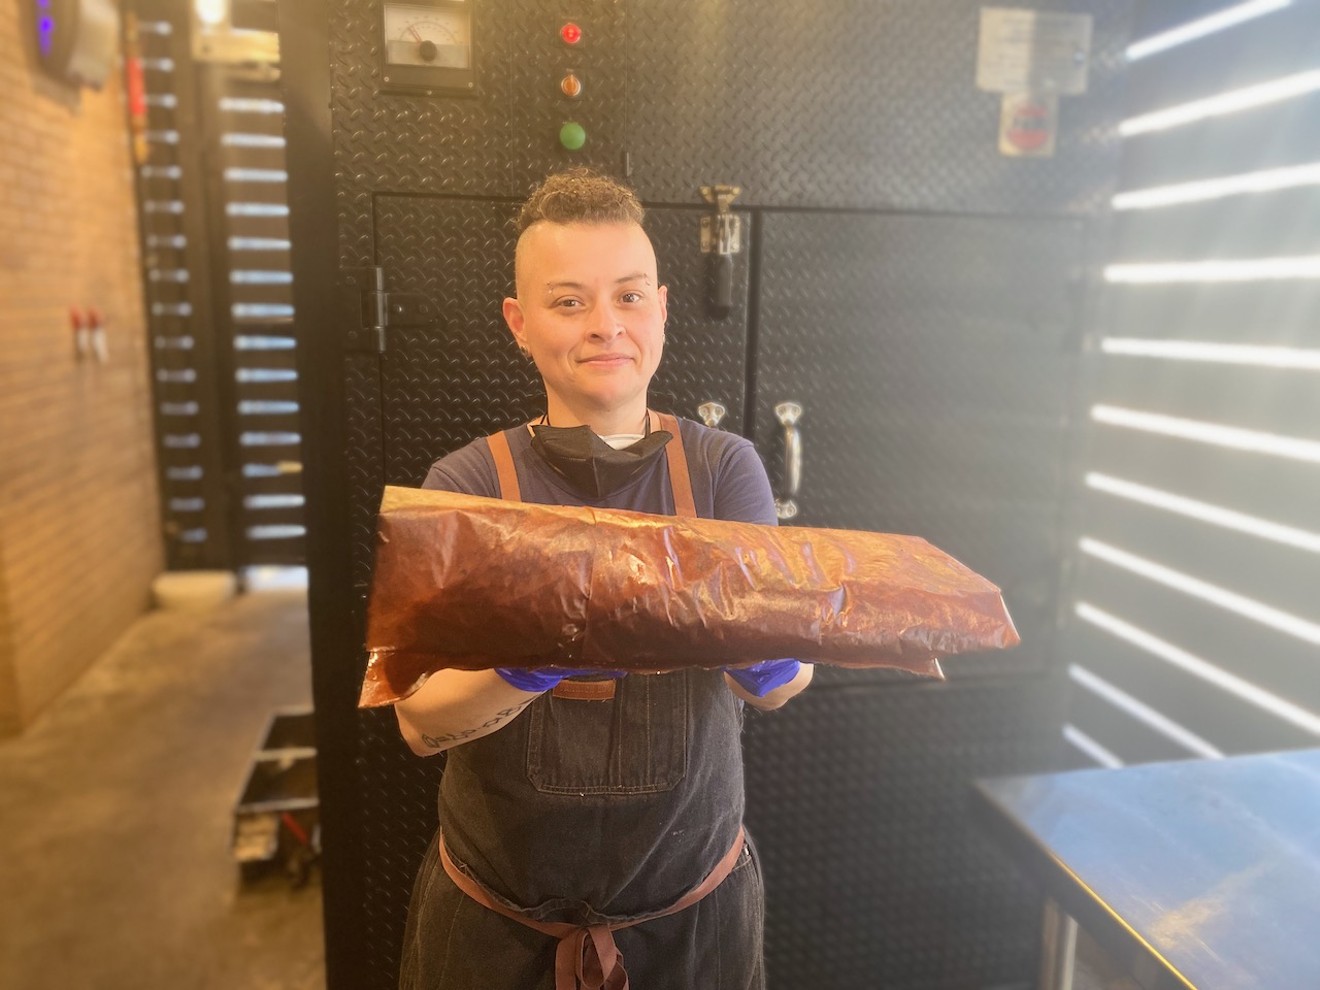 Chef Covarrubias trims, wraps, and smokes around 1,000 pounds of meat a week.